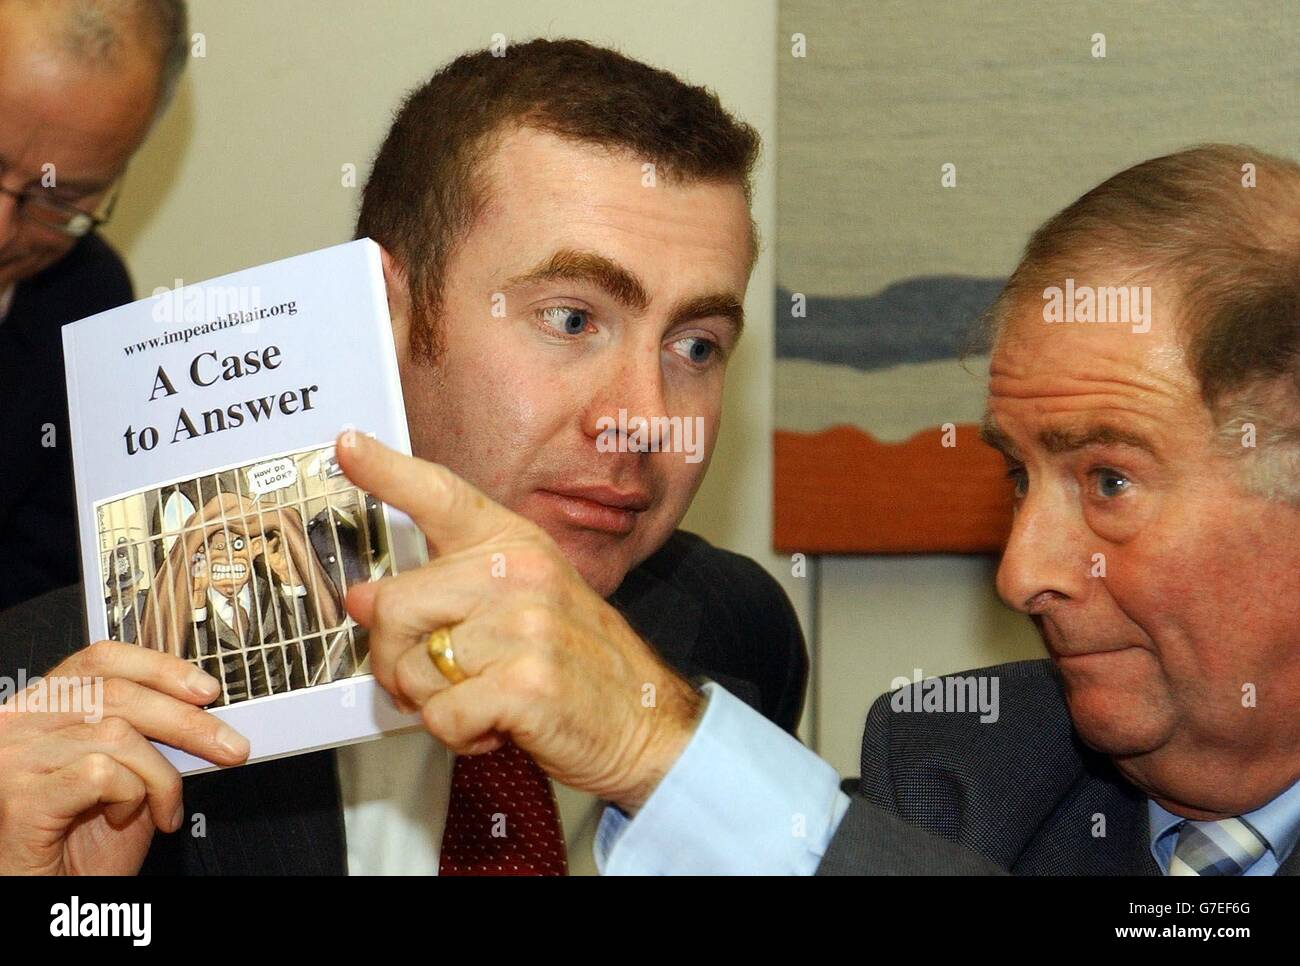 Adam Price (left) of Plaid Cymru with Roger Gale MP holding copies of 'A case to answer' the report on the Prime Ministers coduct in the war against Iraq, during a press conference, where celebrity anti-war campaigners and MP's called for Tony Blair's impeachment. Some 23 MPs have signed a Commons motion calling for the Prime Minister to be thrown out of office for 'gross misconduct'. Author Iain Banks, playwright Harold Pinter and musician Brian Eno are due to join them for a photocall in Parliament. Stock Photo